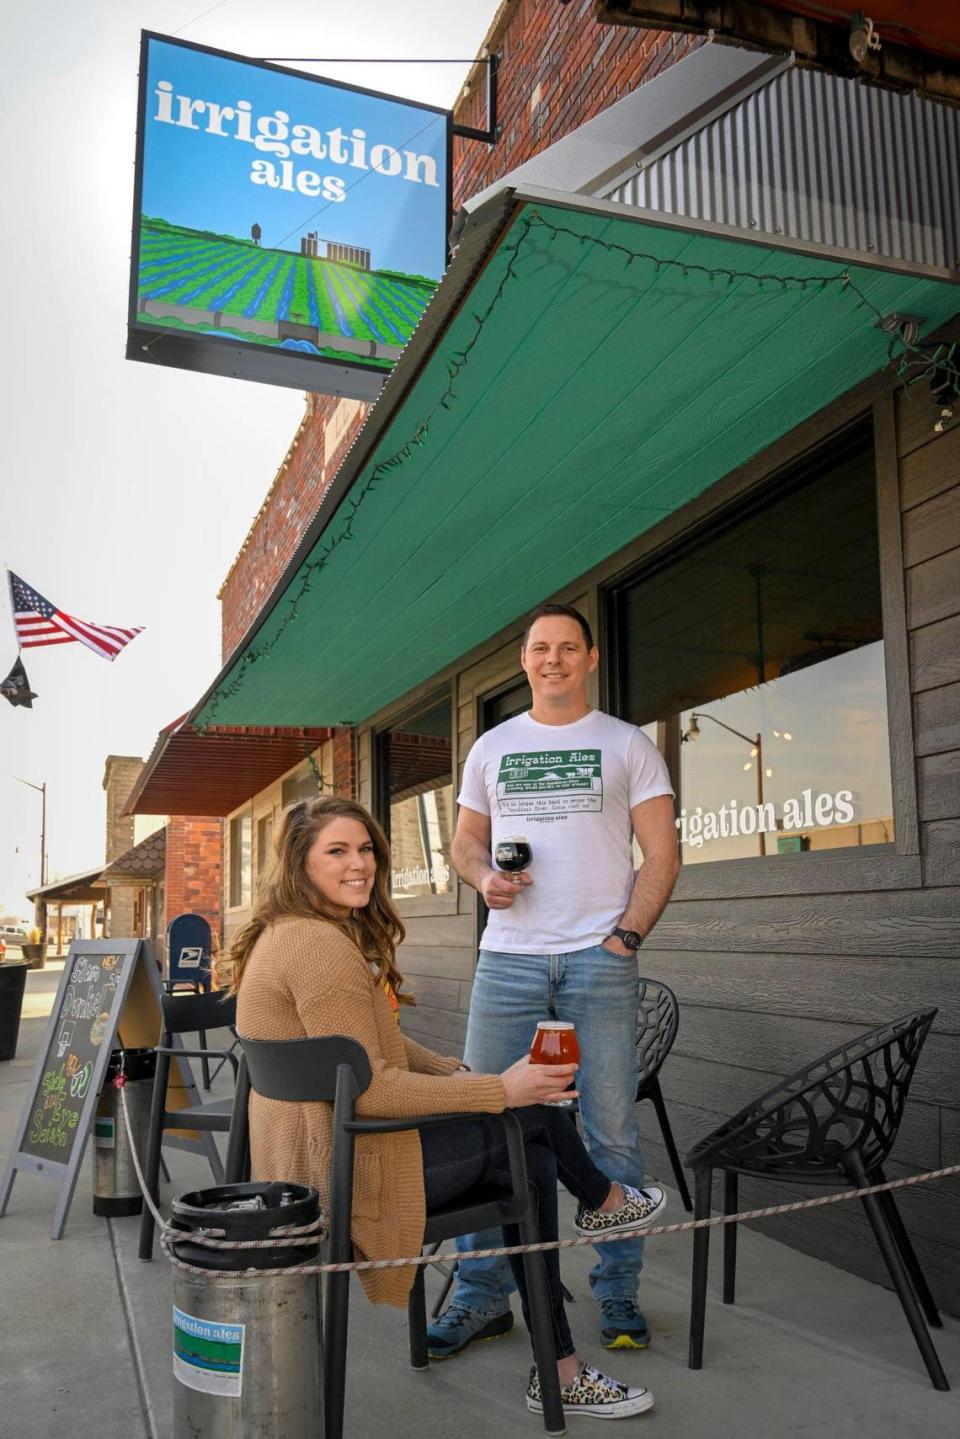 Luke and Jennifer Mahin are co-owners of Irrigation Ales, a microbrewery that opened in early 2022 on Main Street in Courtland, Kansas, population 294.